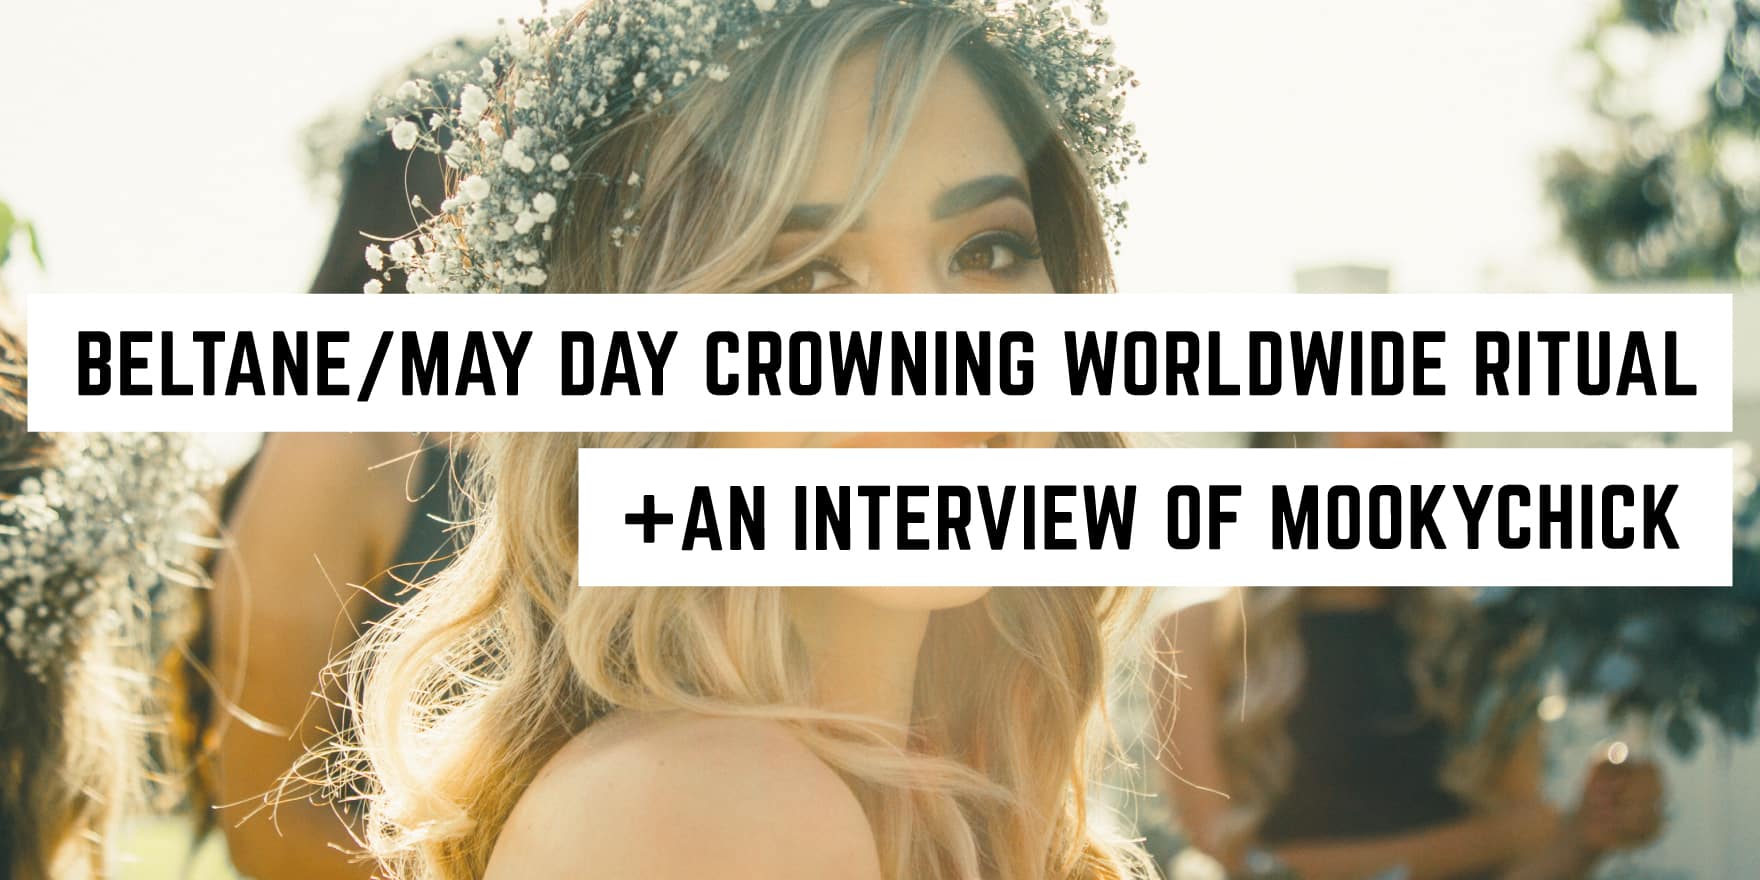 A woman crowned with a floral tiara, evoking the spirit of Beltane or May Day celebrations, highlighted in an editorial context with mention of an interview feature on new age products.